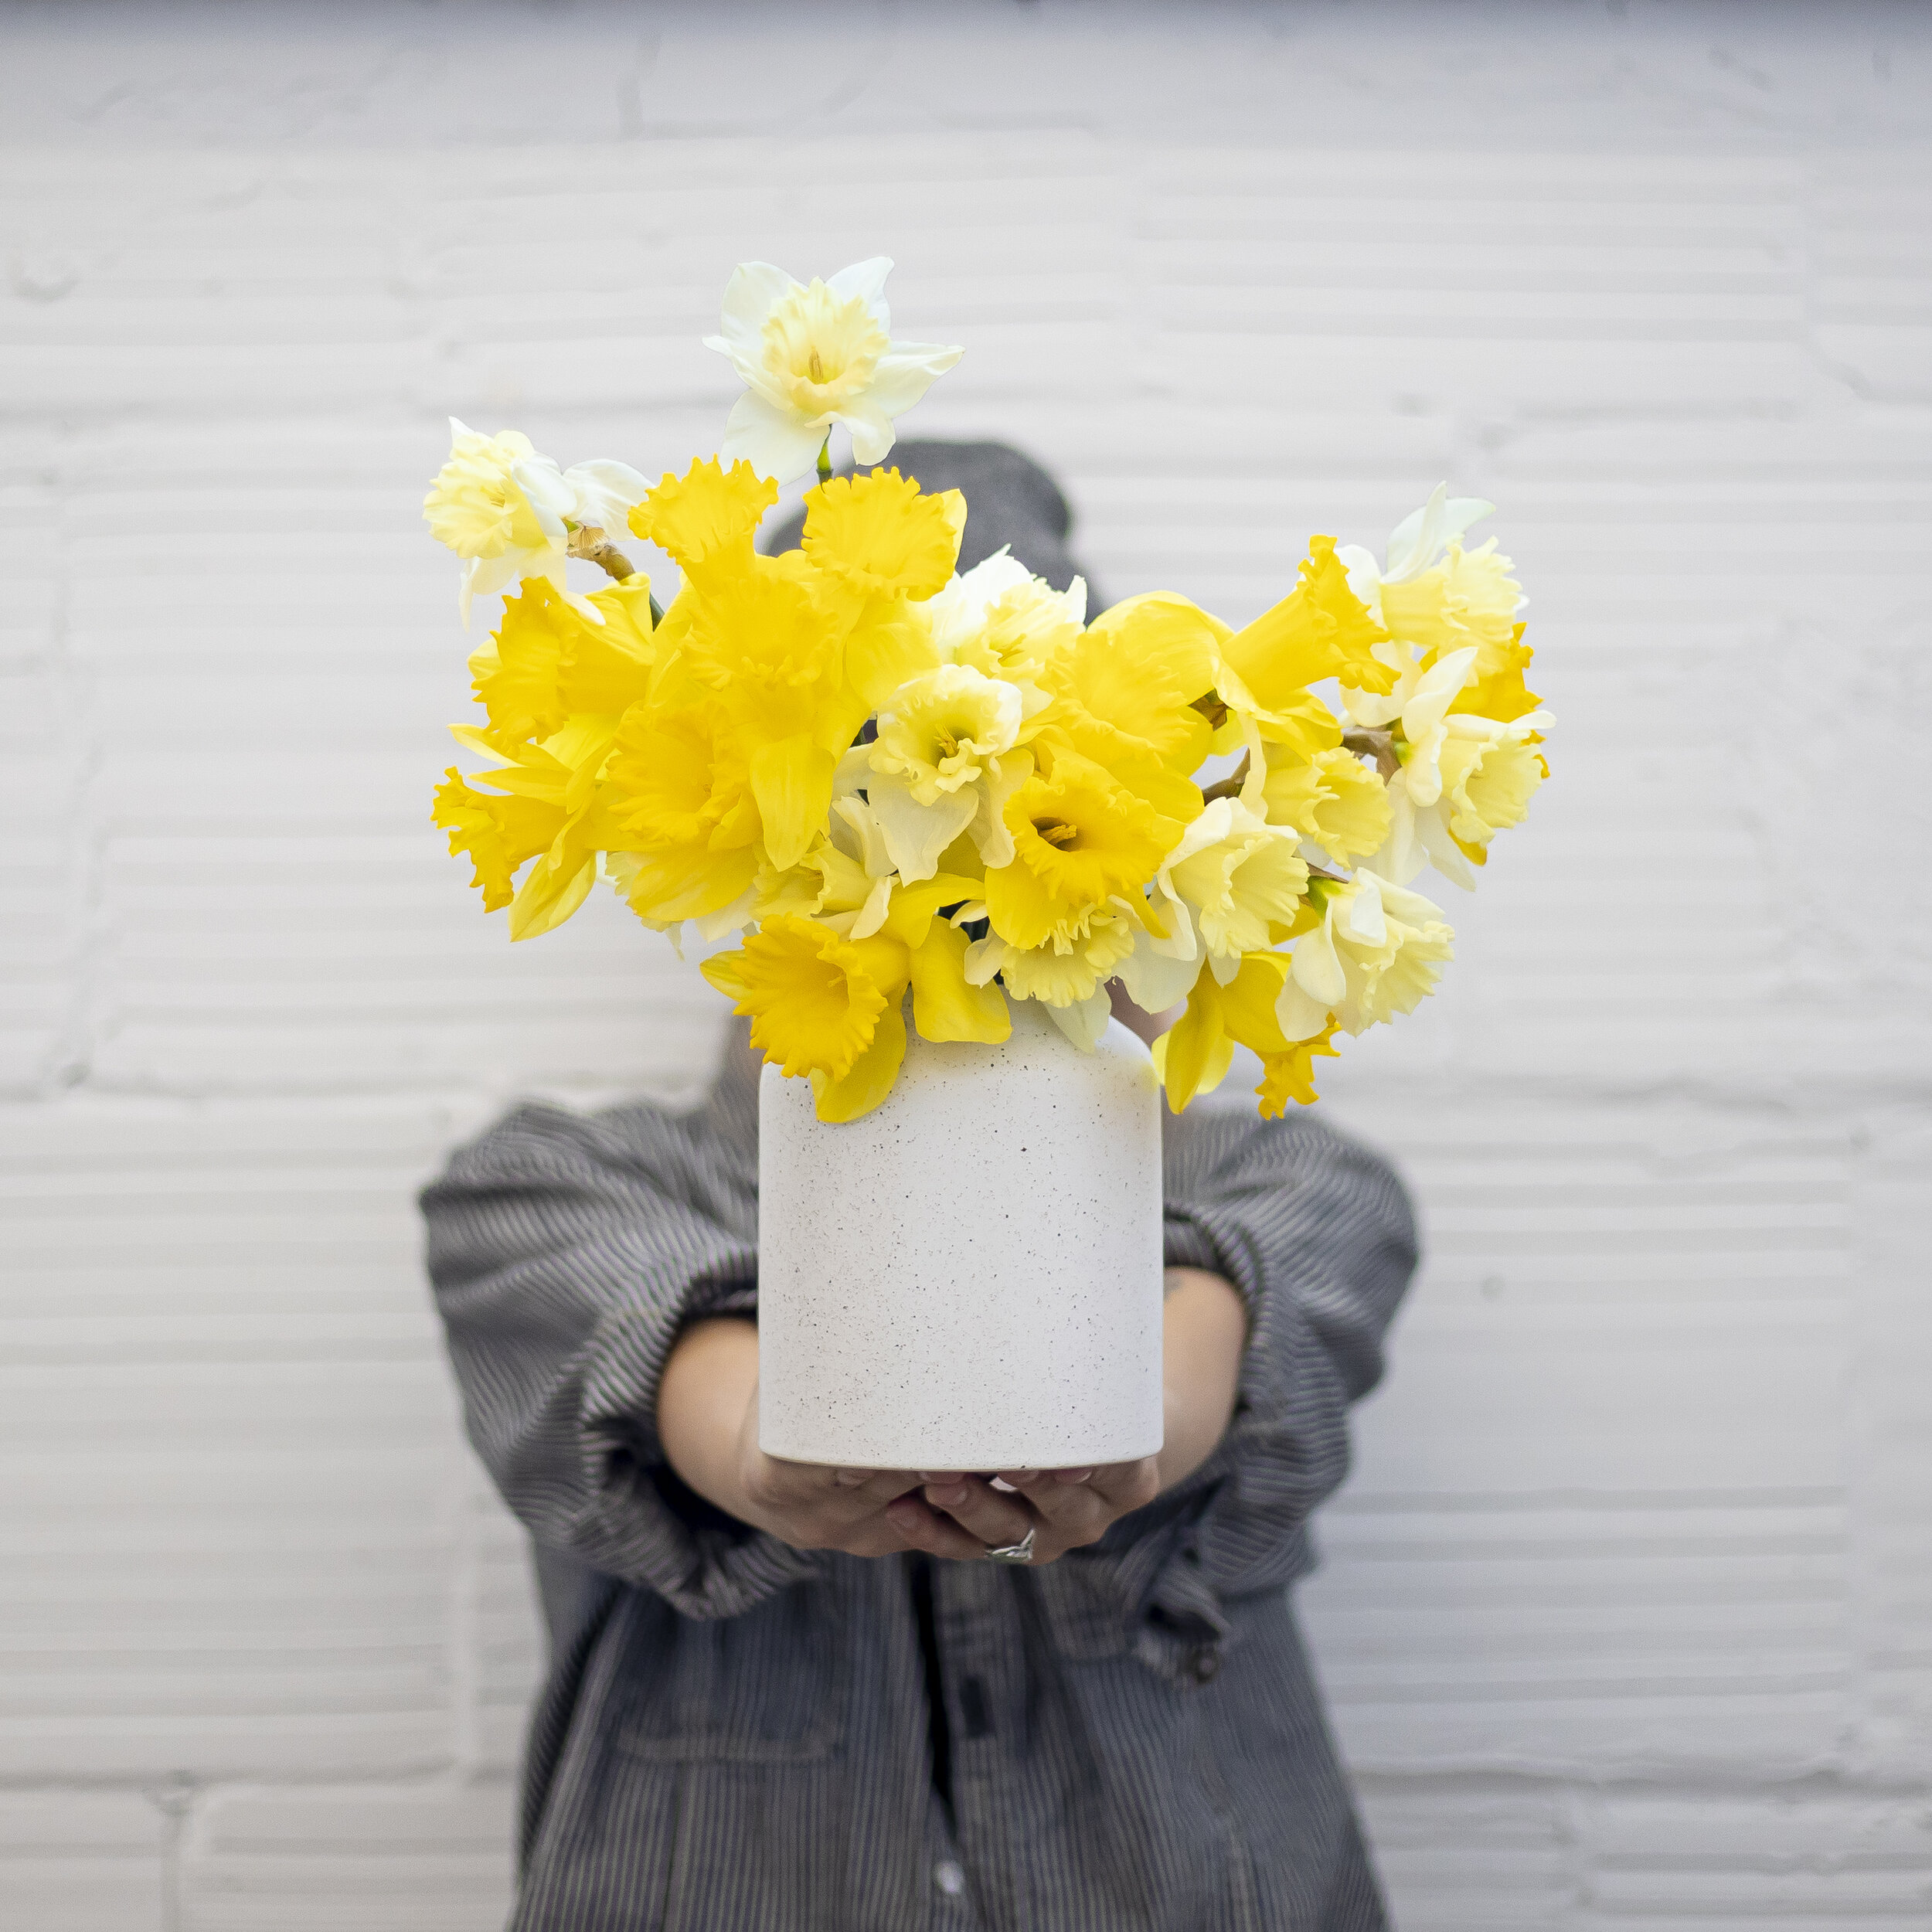 A flower arrangement of bright yellow daffodils being held in a white ceramic vase.